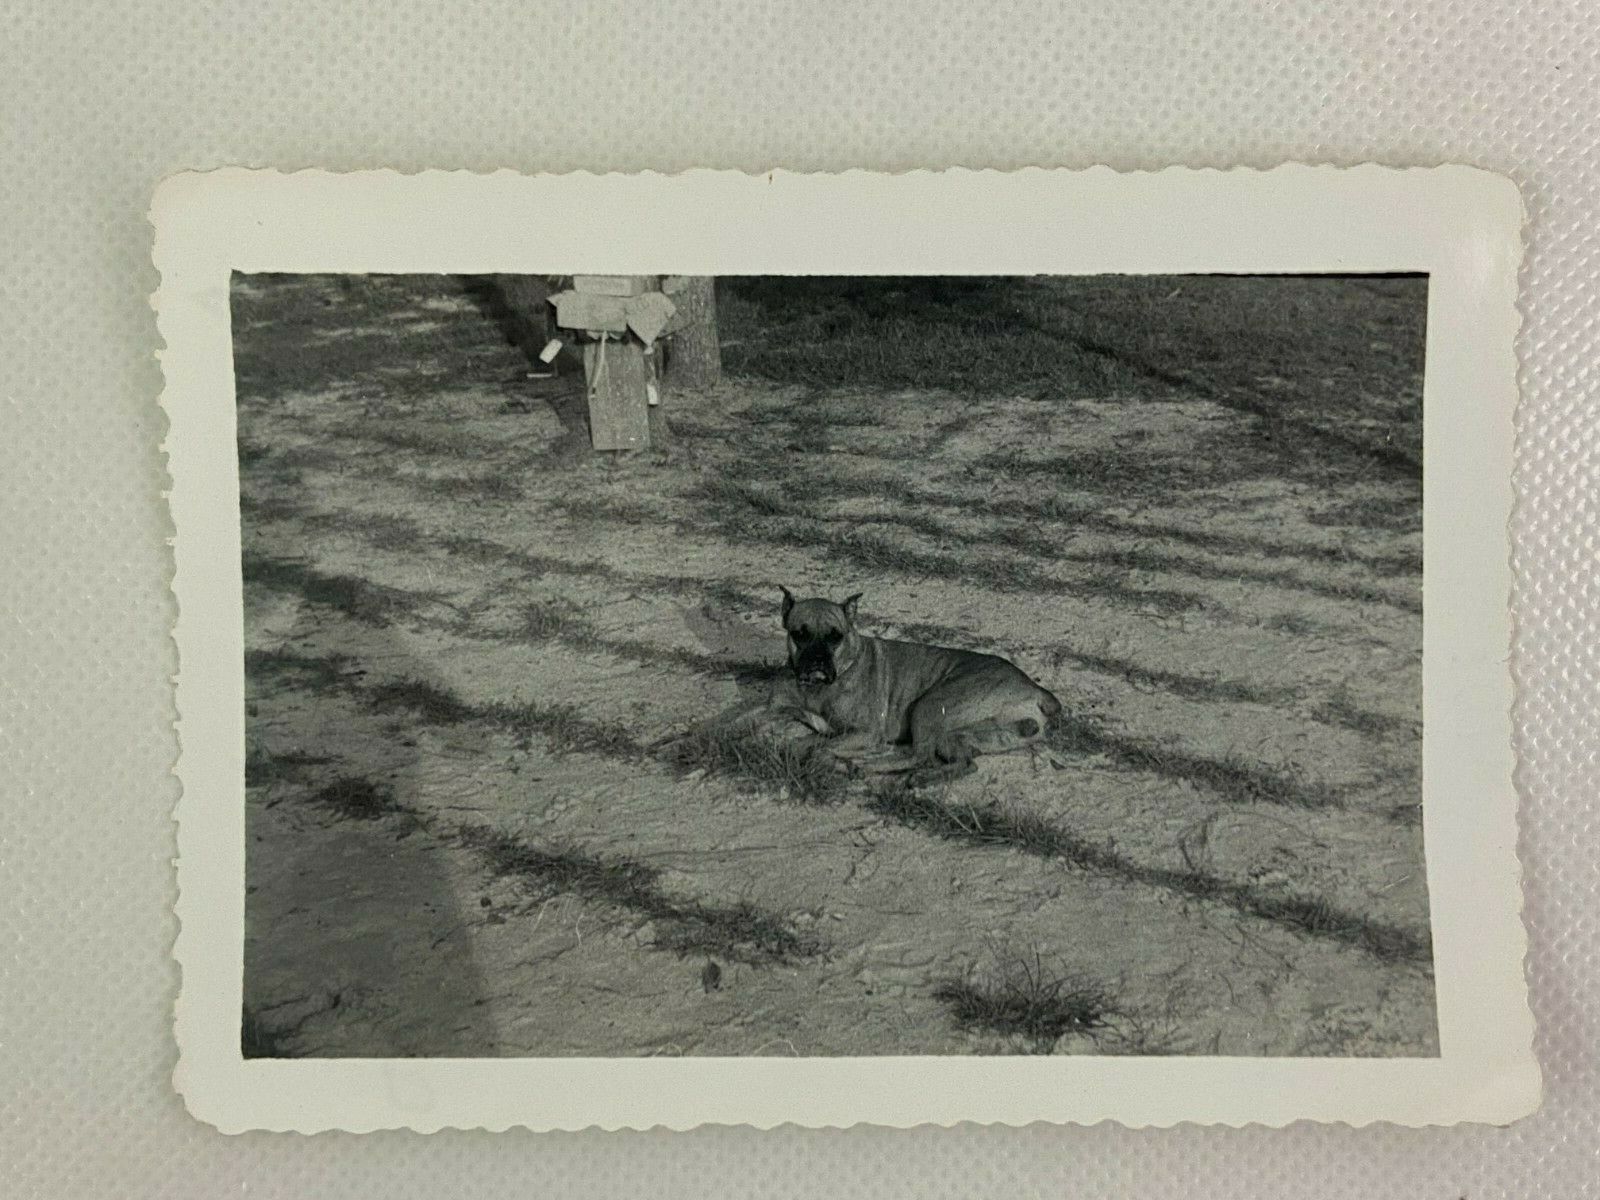 Boxer Dog Laying In Dirt Canine Vintage B&W Photograph 3.25 x 4.5